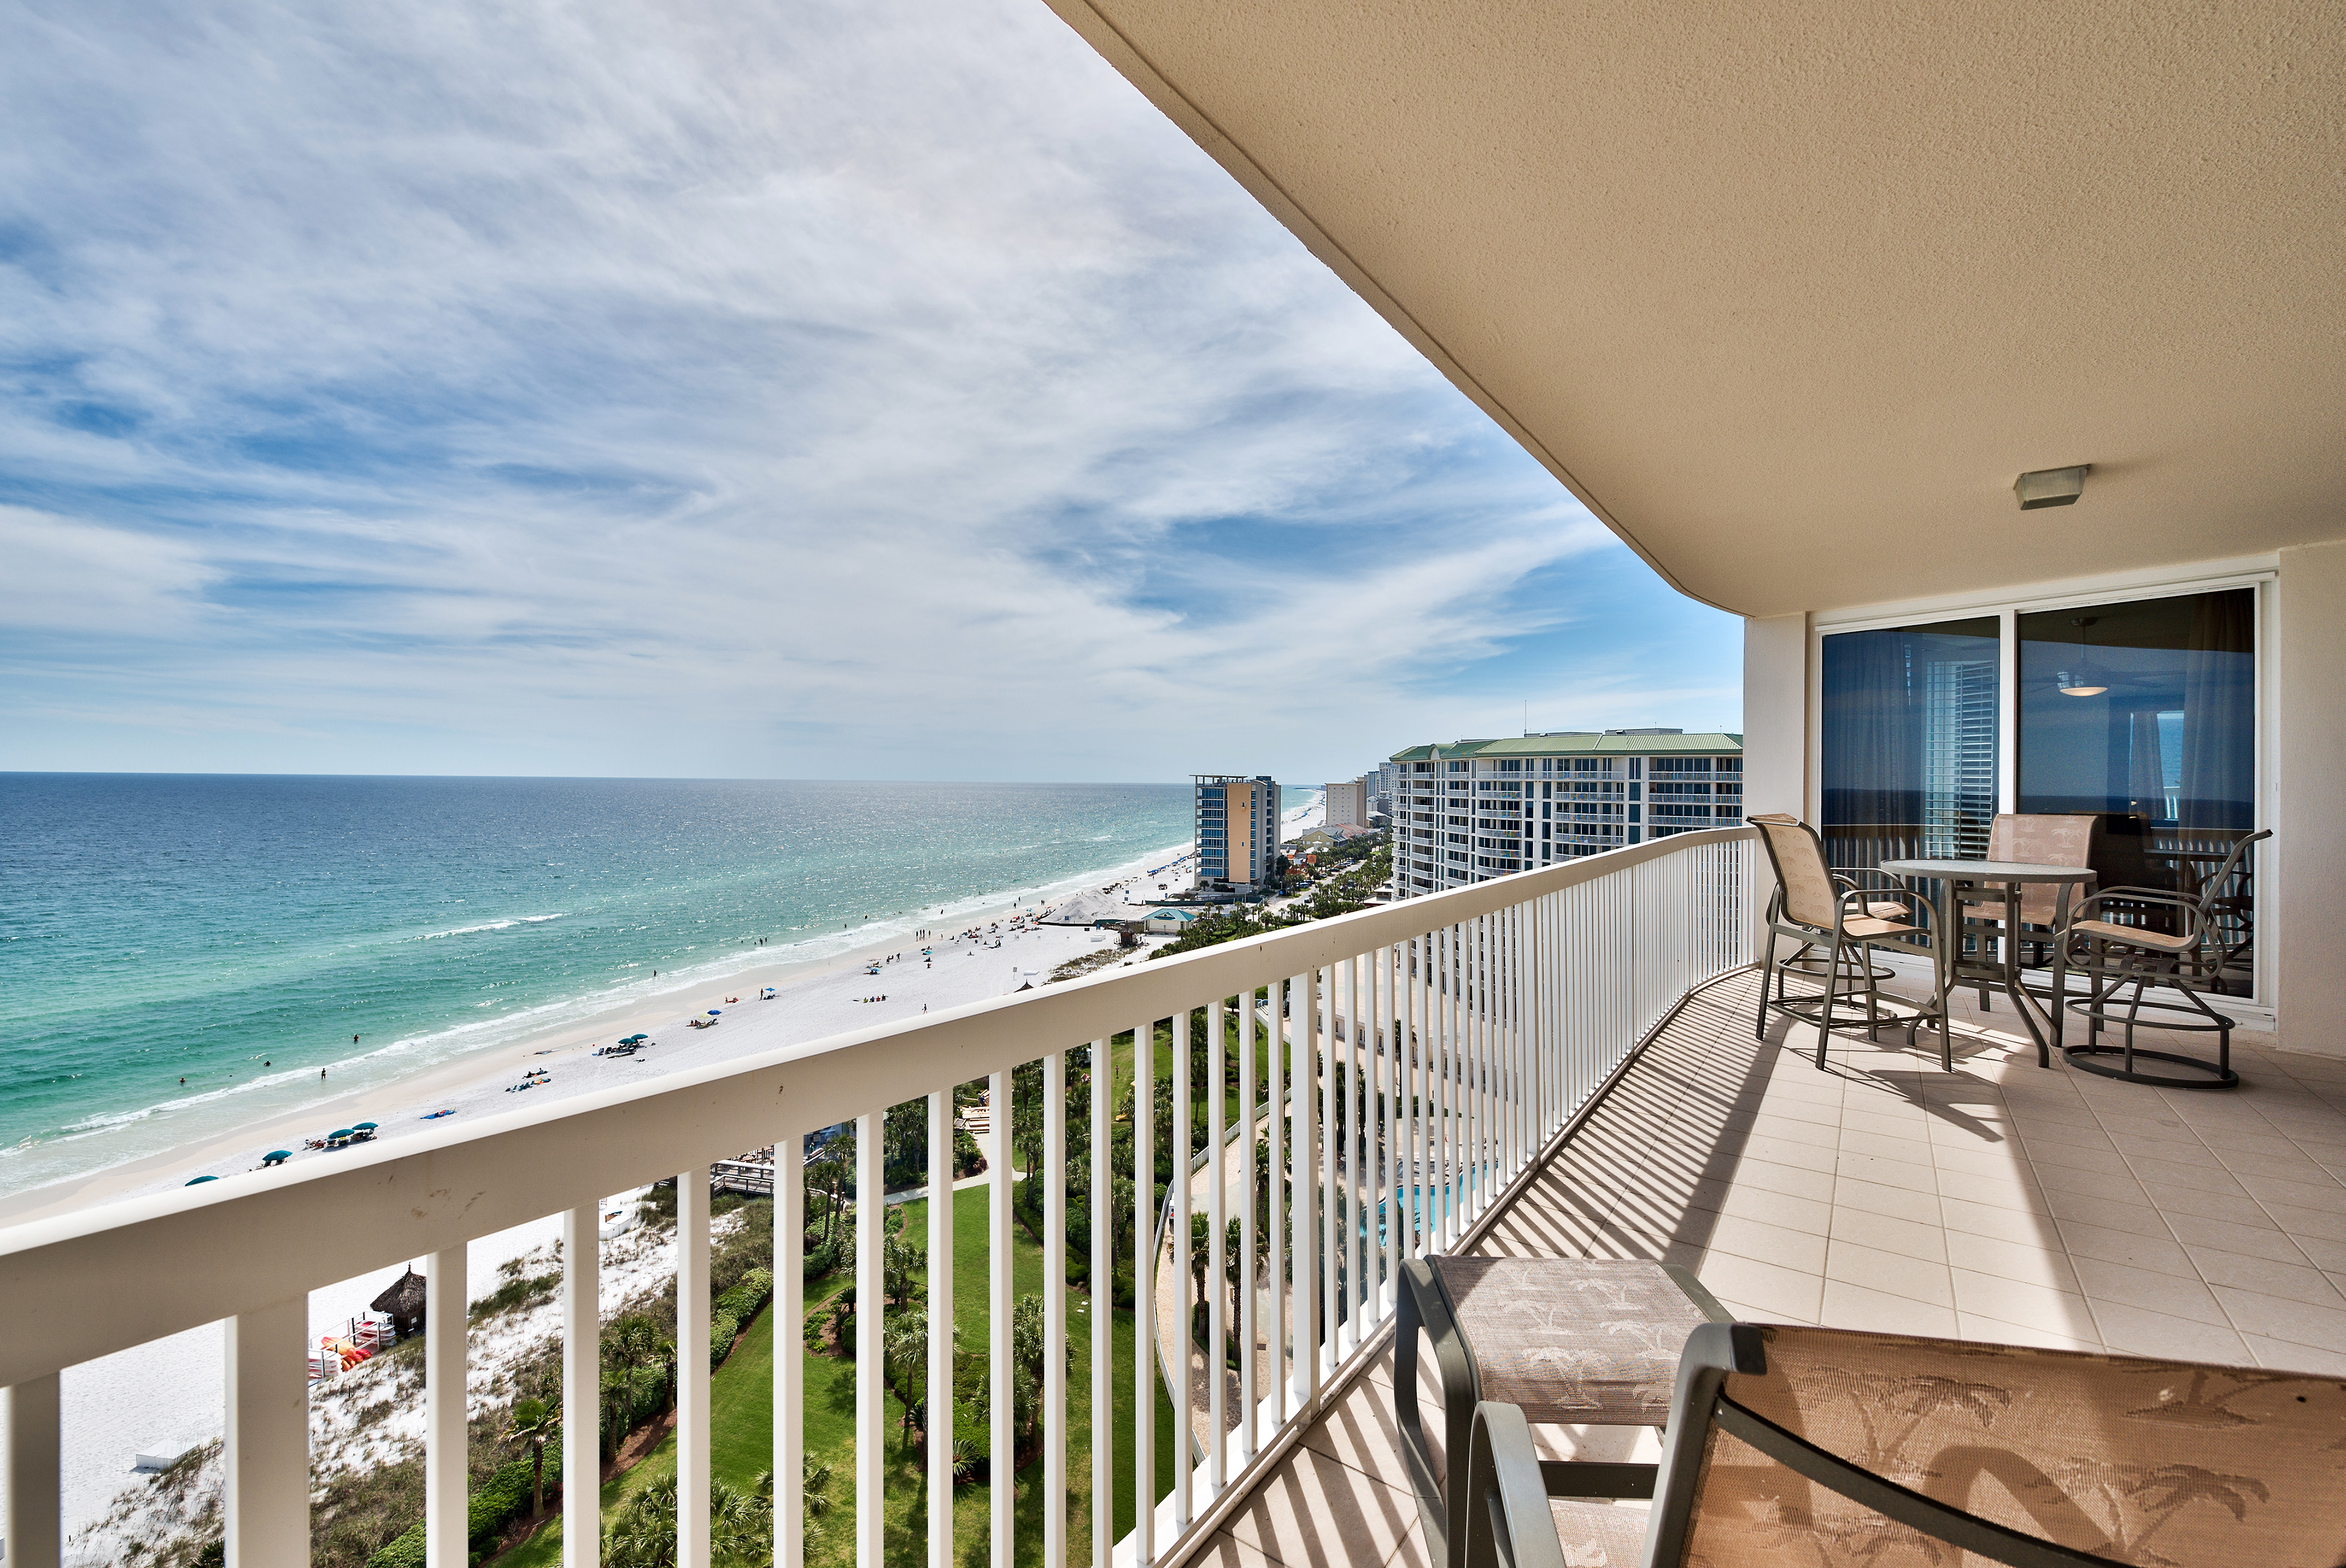 The view from a balcony of one of Destin's Gulf front condos